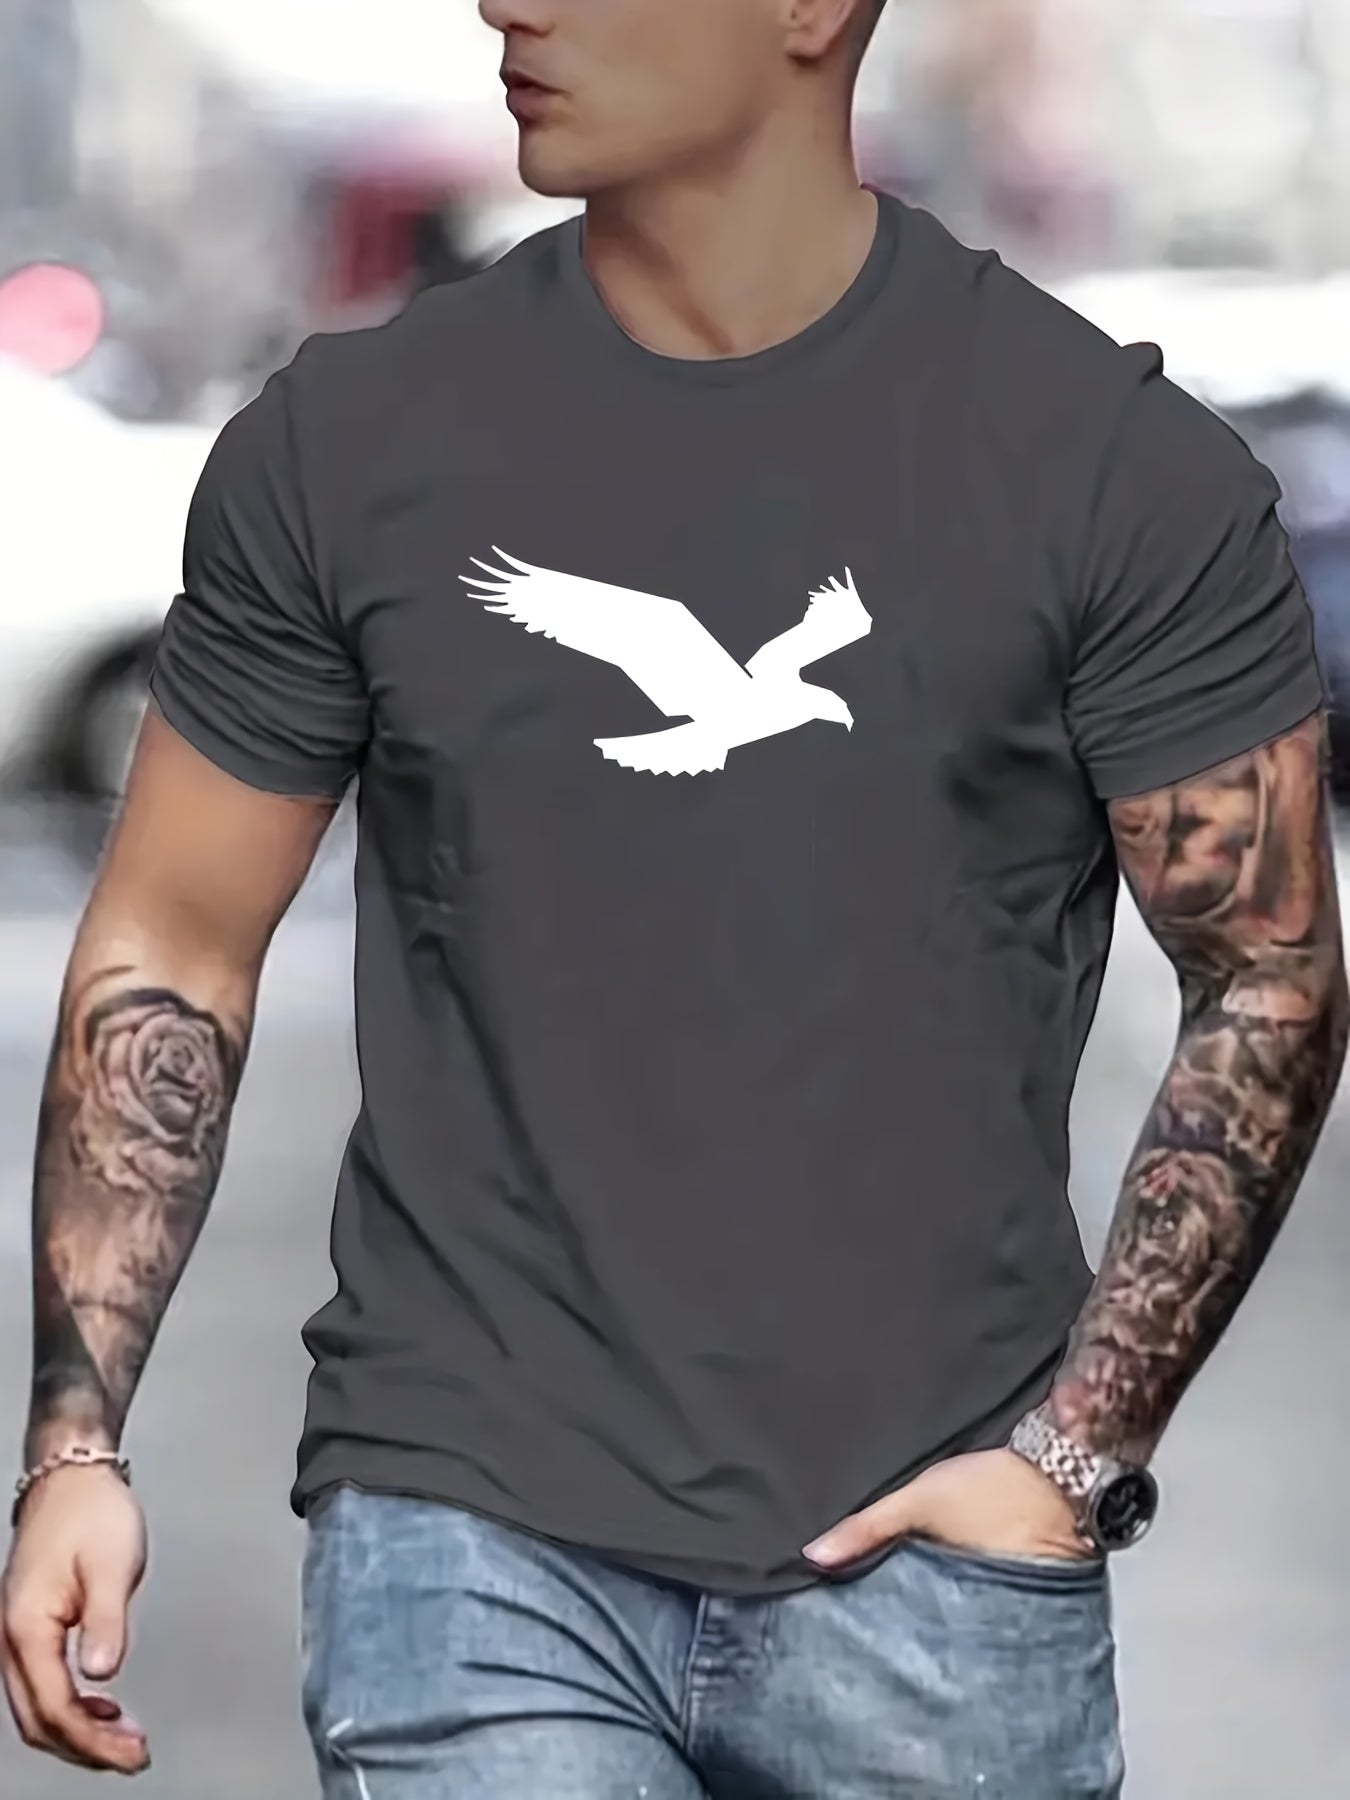 Eagle Pattern T-shirt, Men's Casual Street Style Slightly Stretch Round Neck Tee Shirt For Summer Fall